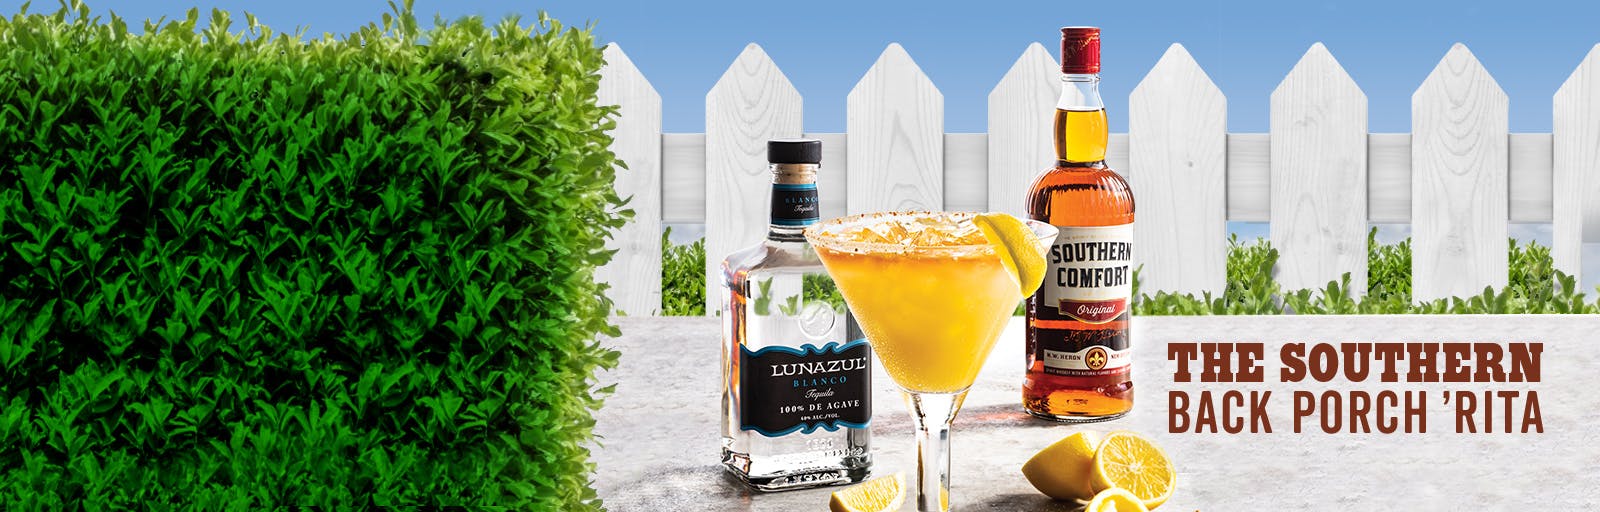 The Southern Back Porch 'Rita | Chili's Margarita of the Month | July